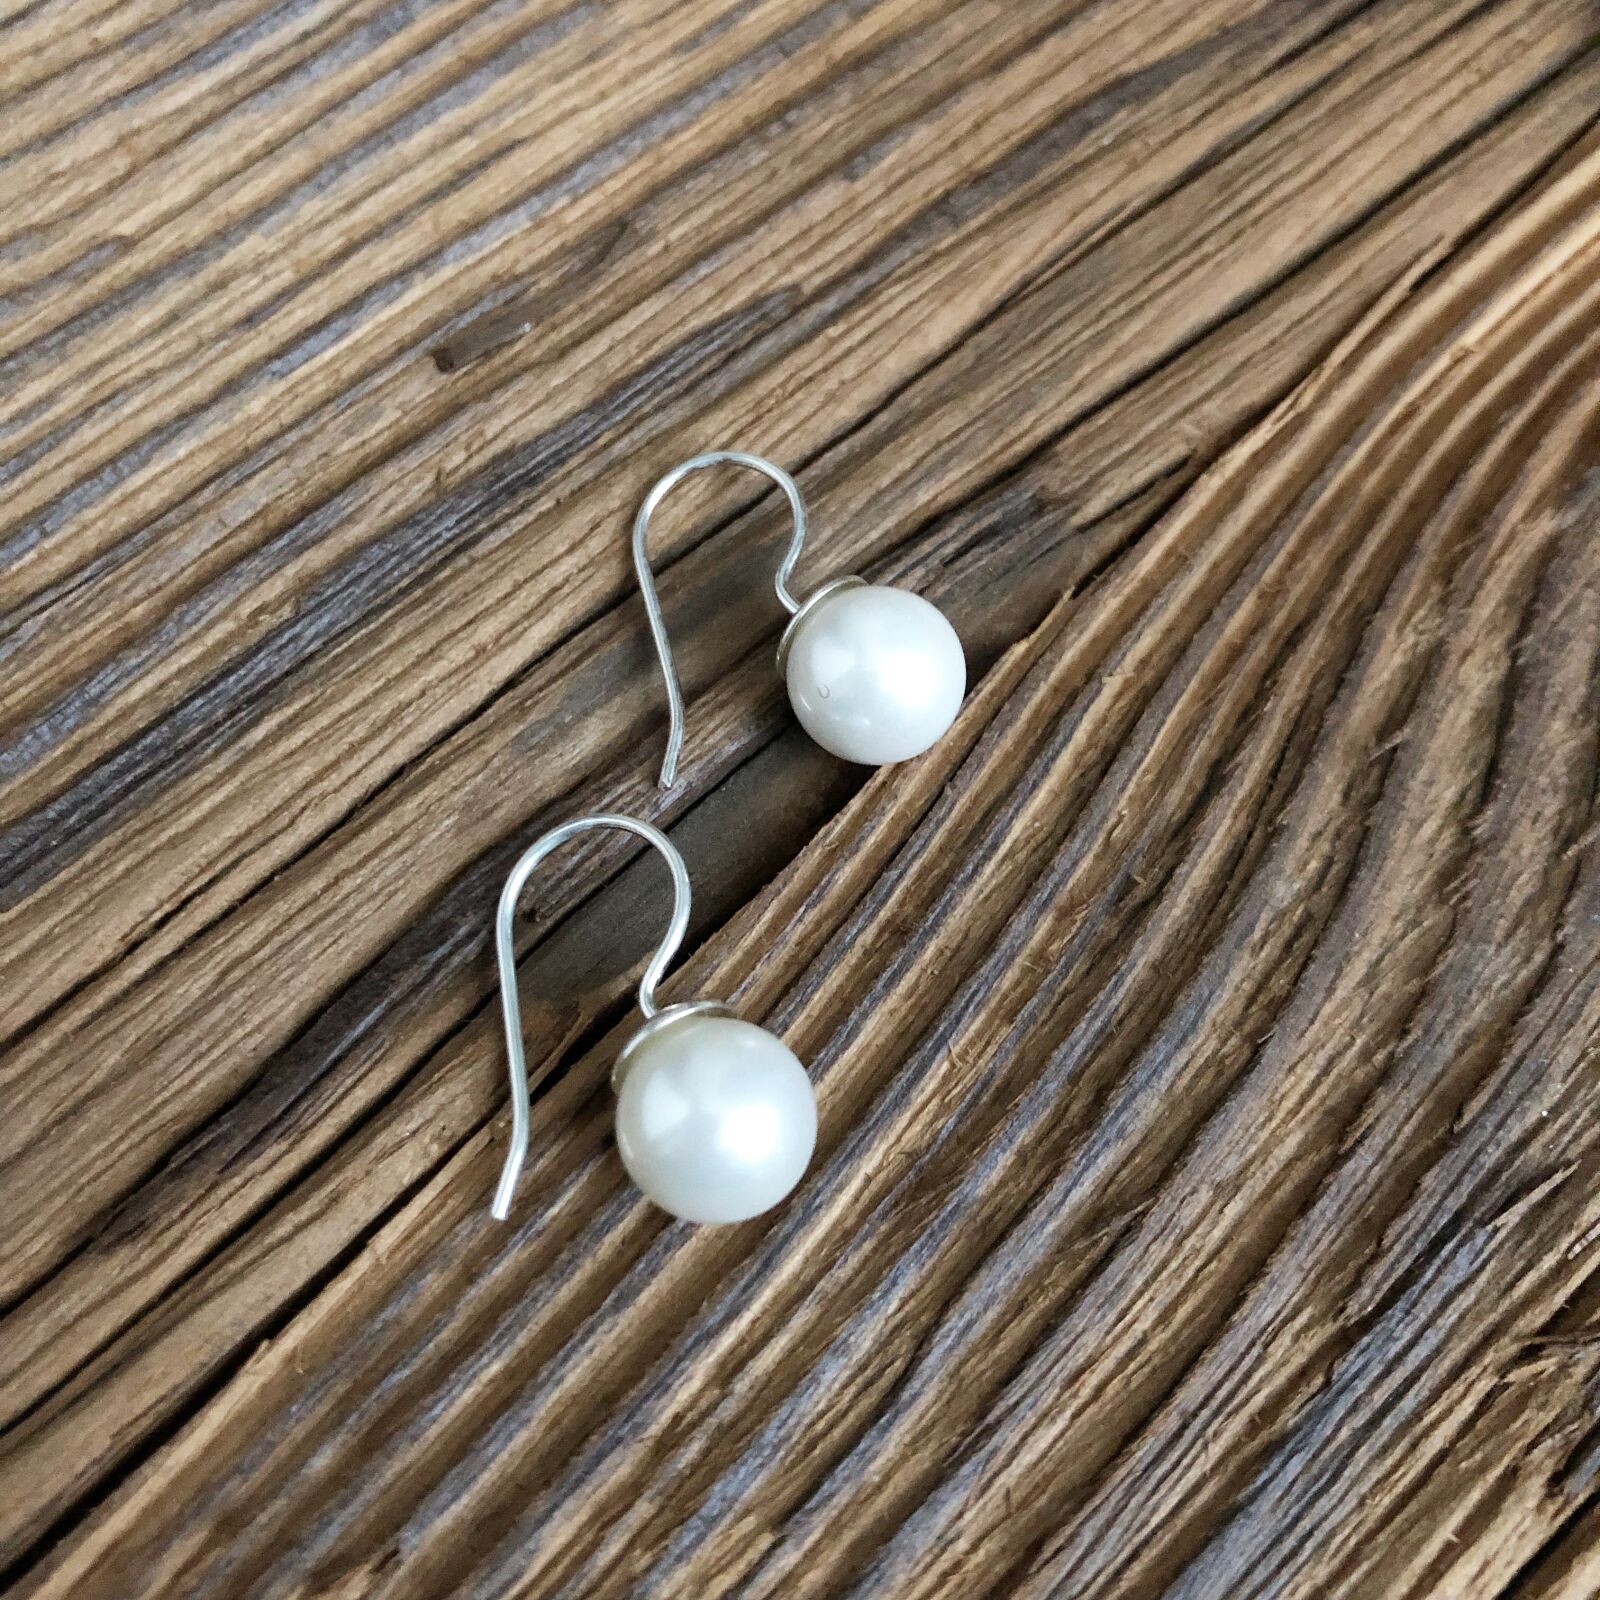 Apple iPhone 8 sample photo. Earrings, pearls, silver photography